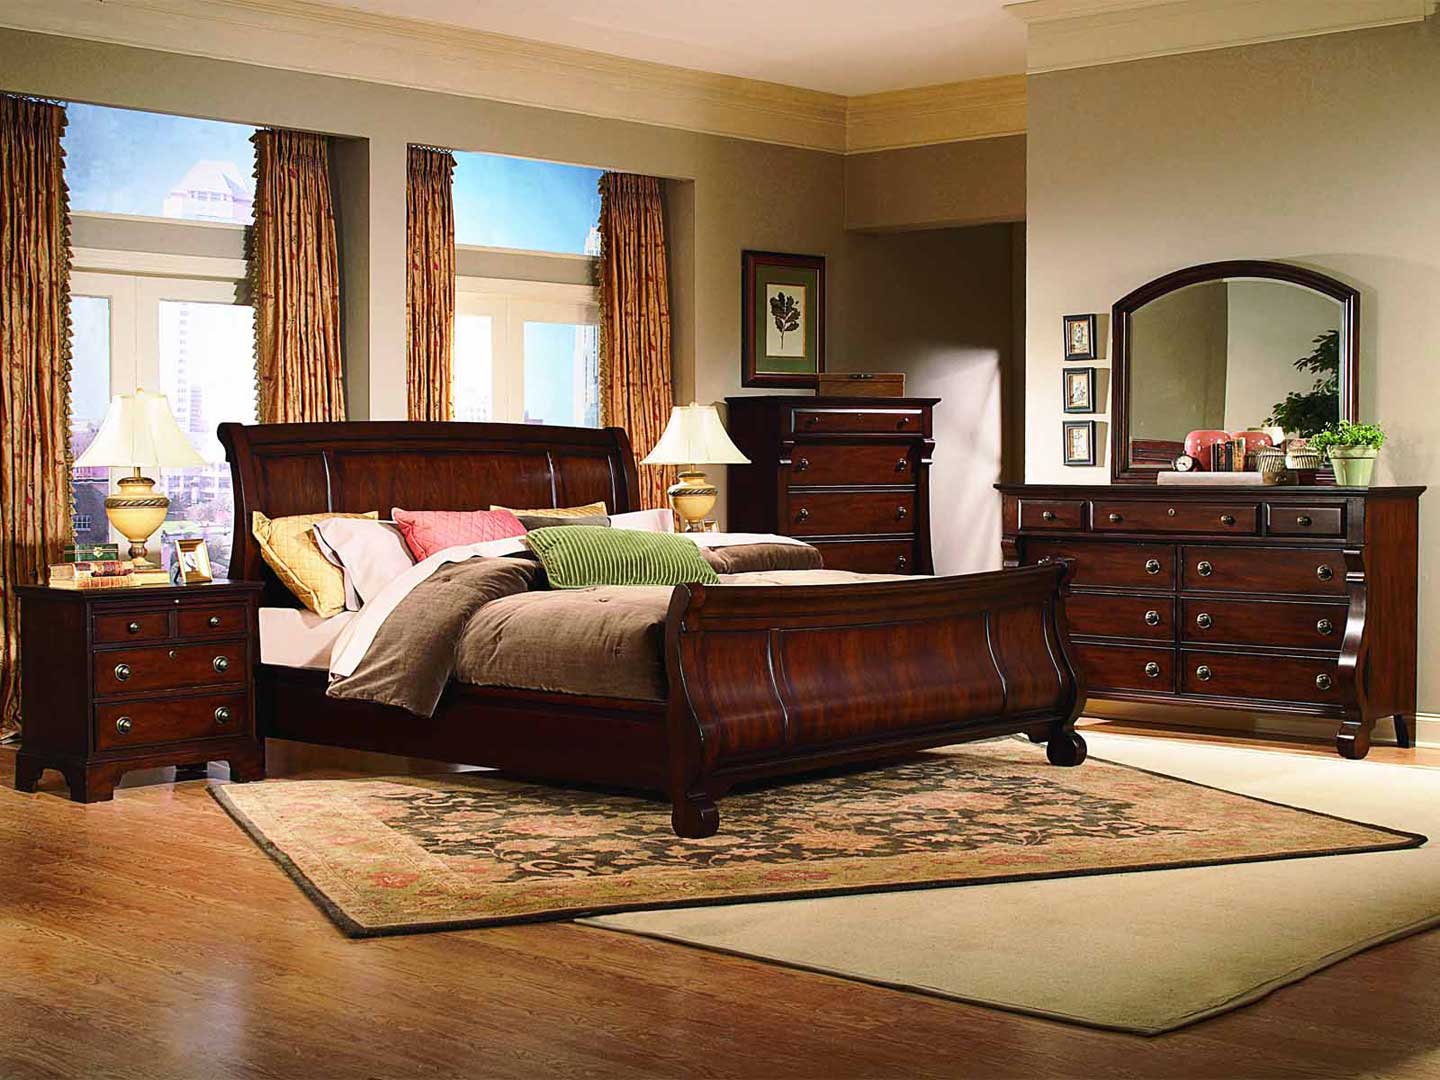 King Bedroom Armoires Surprising King Bedroom Sets With Armoire For Beach House Design Ideas And Agreeable Thick Carpet Design Also Contemporary Dark Wood Bedside Table Idea Also Sweet Round Bedside Lamps Bedroom Enhance The King Bedroom Sets: The Soft Vineyard-6